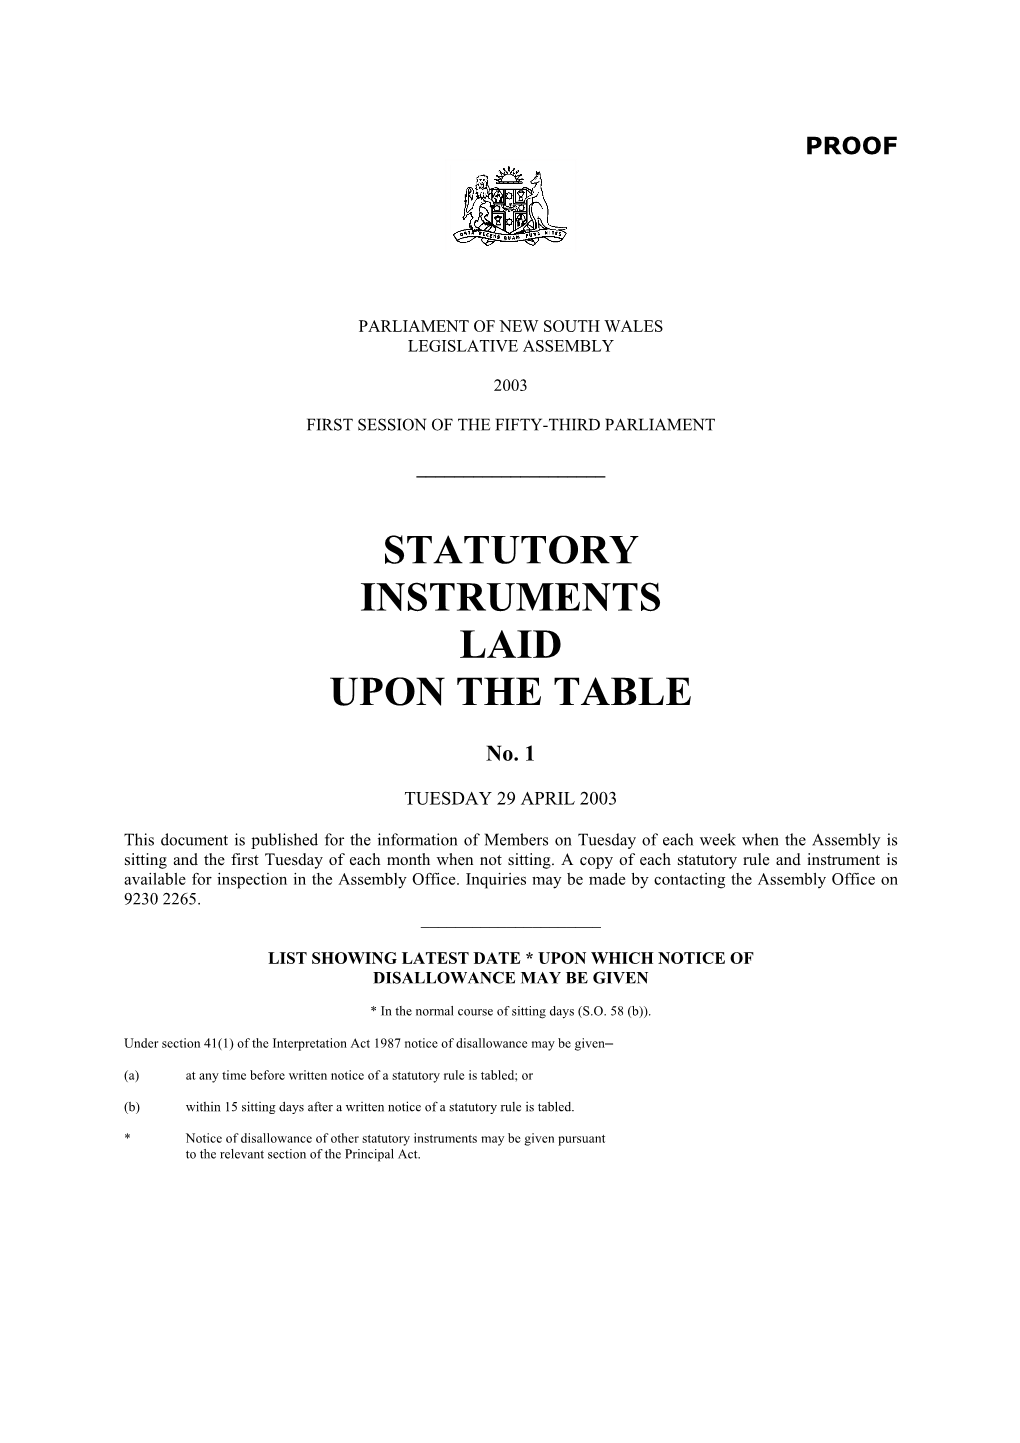 Statutory Instruments Laid Upon the Table